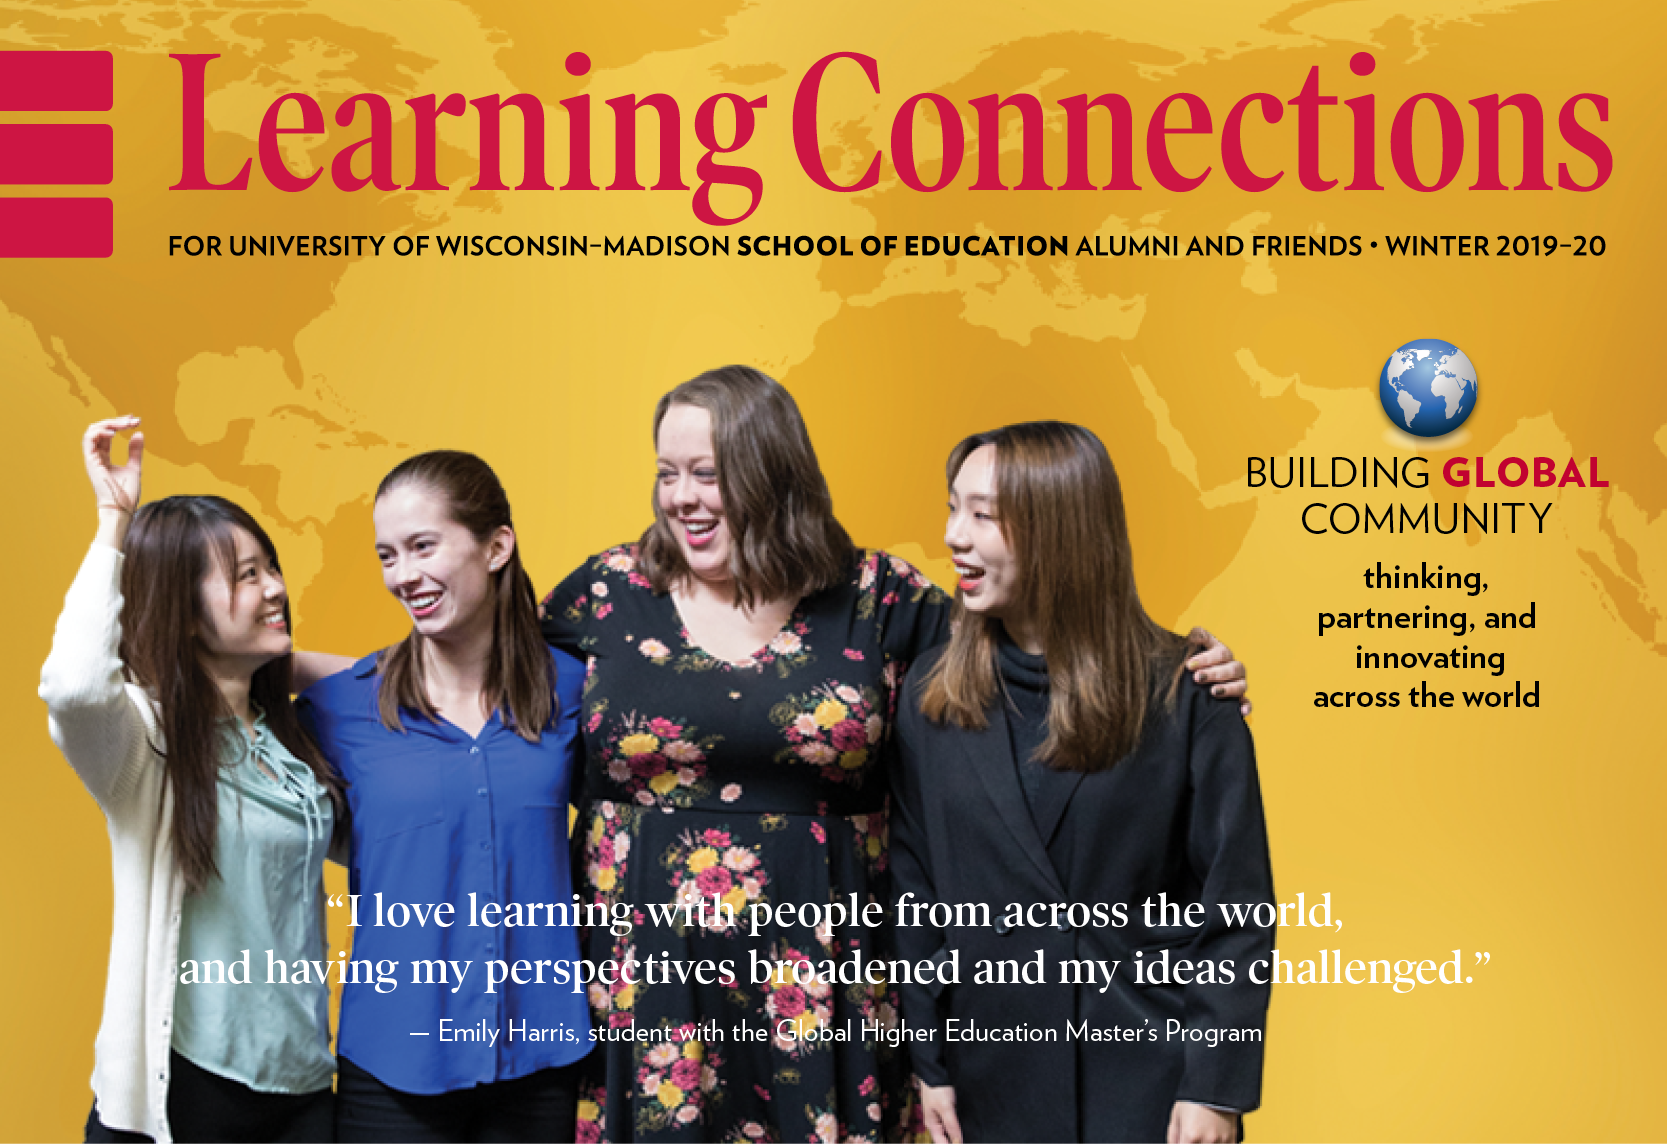 learning connections magazine cover showing global higher education students and a bit of text saying 